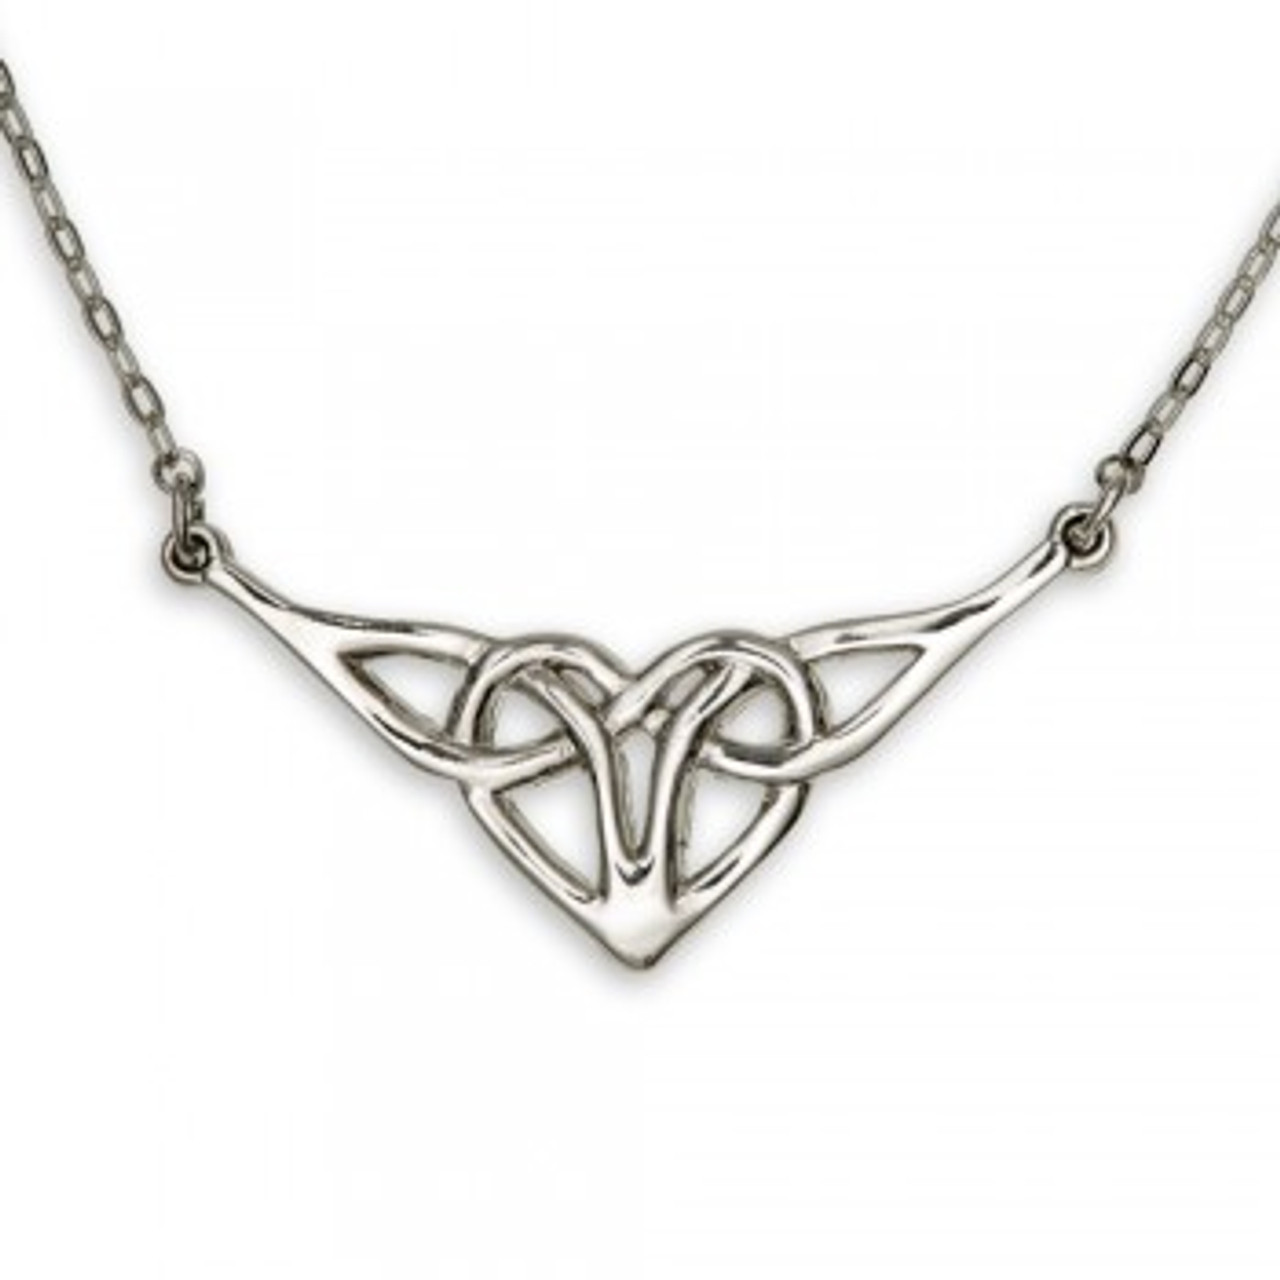 Wholesale Celtic Heart Necklace for Jewelry Making - TierraCast